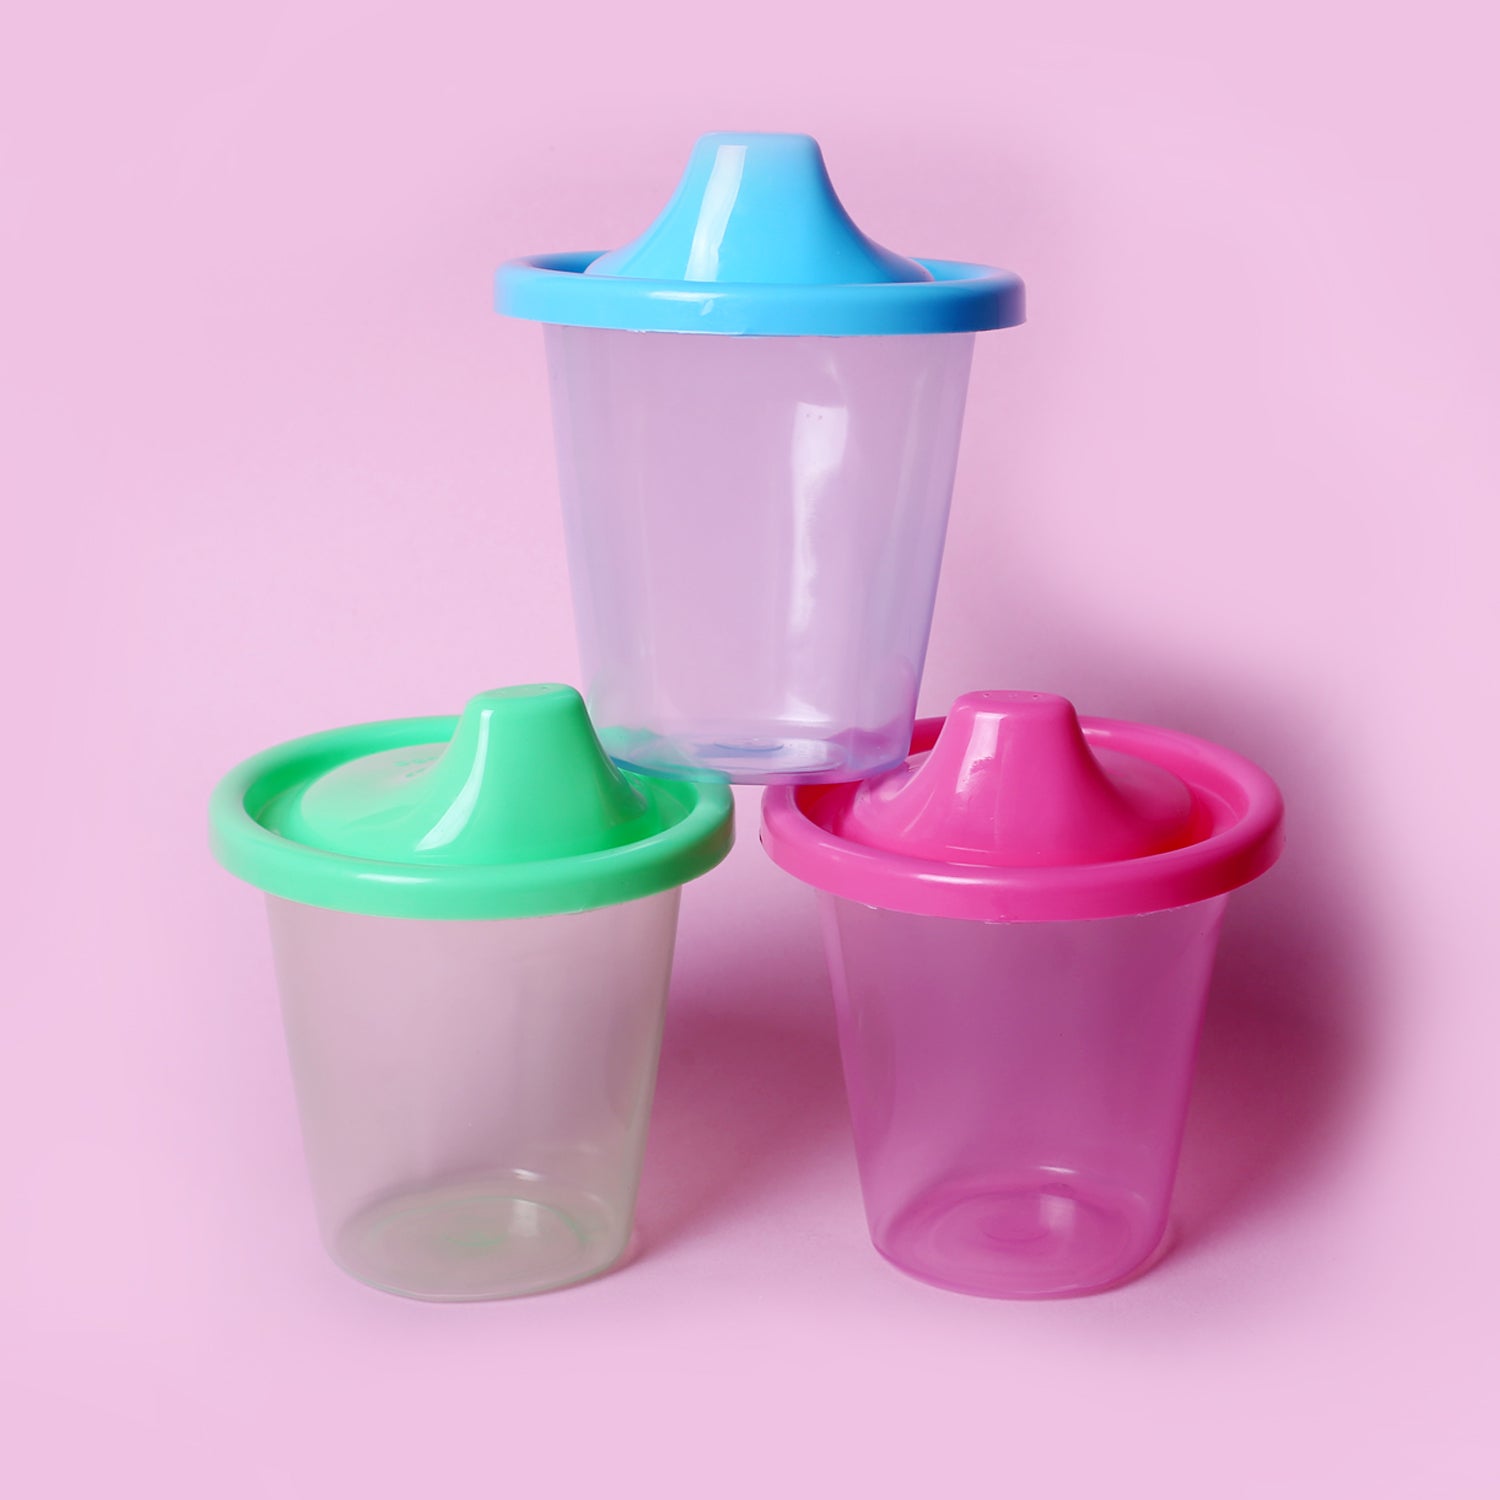 Pack Of 3 Baby Training Cup 6m+ 220ml/7.5oz